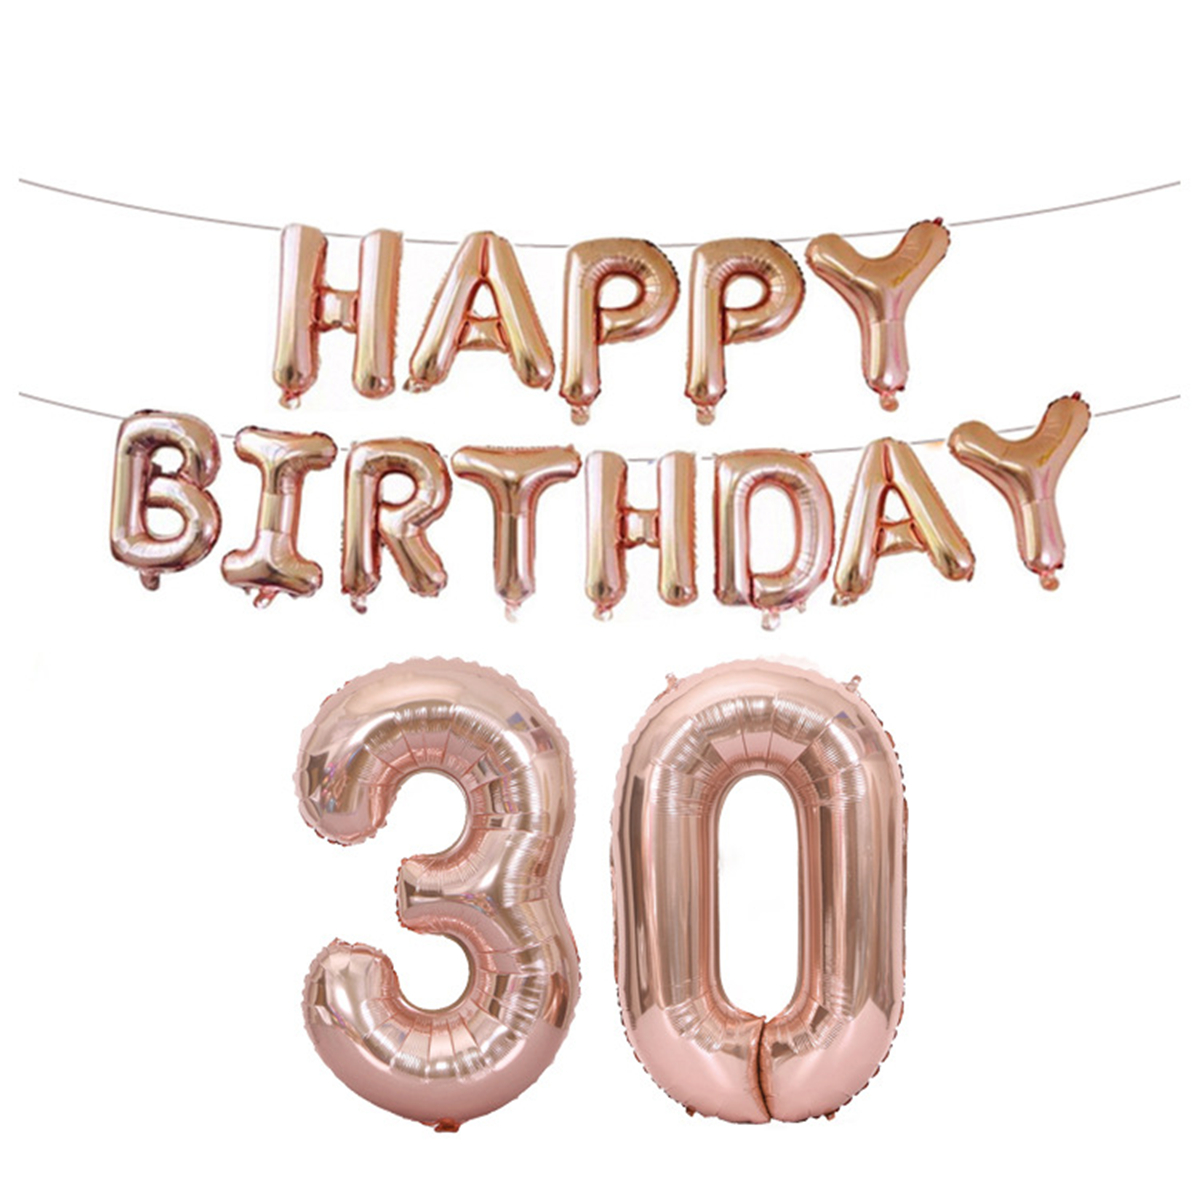 182130405060th-Rose-Gold-Happy-Birthday-Foil-Balloon-Banner-Kit-Party-Decorations-1456819-4